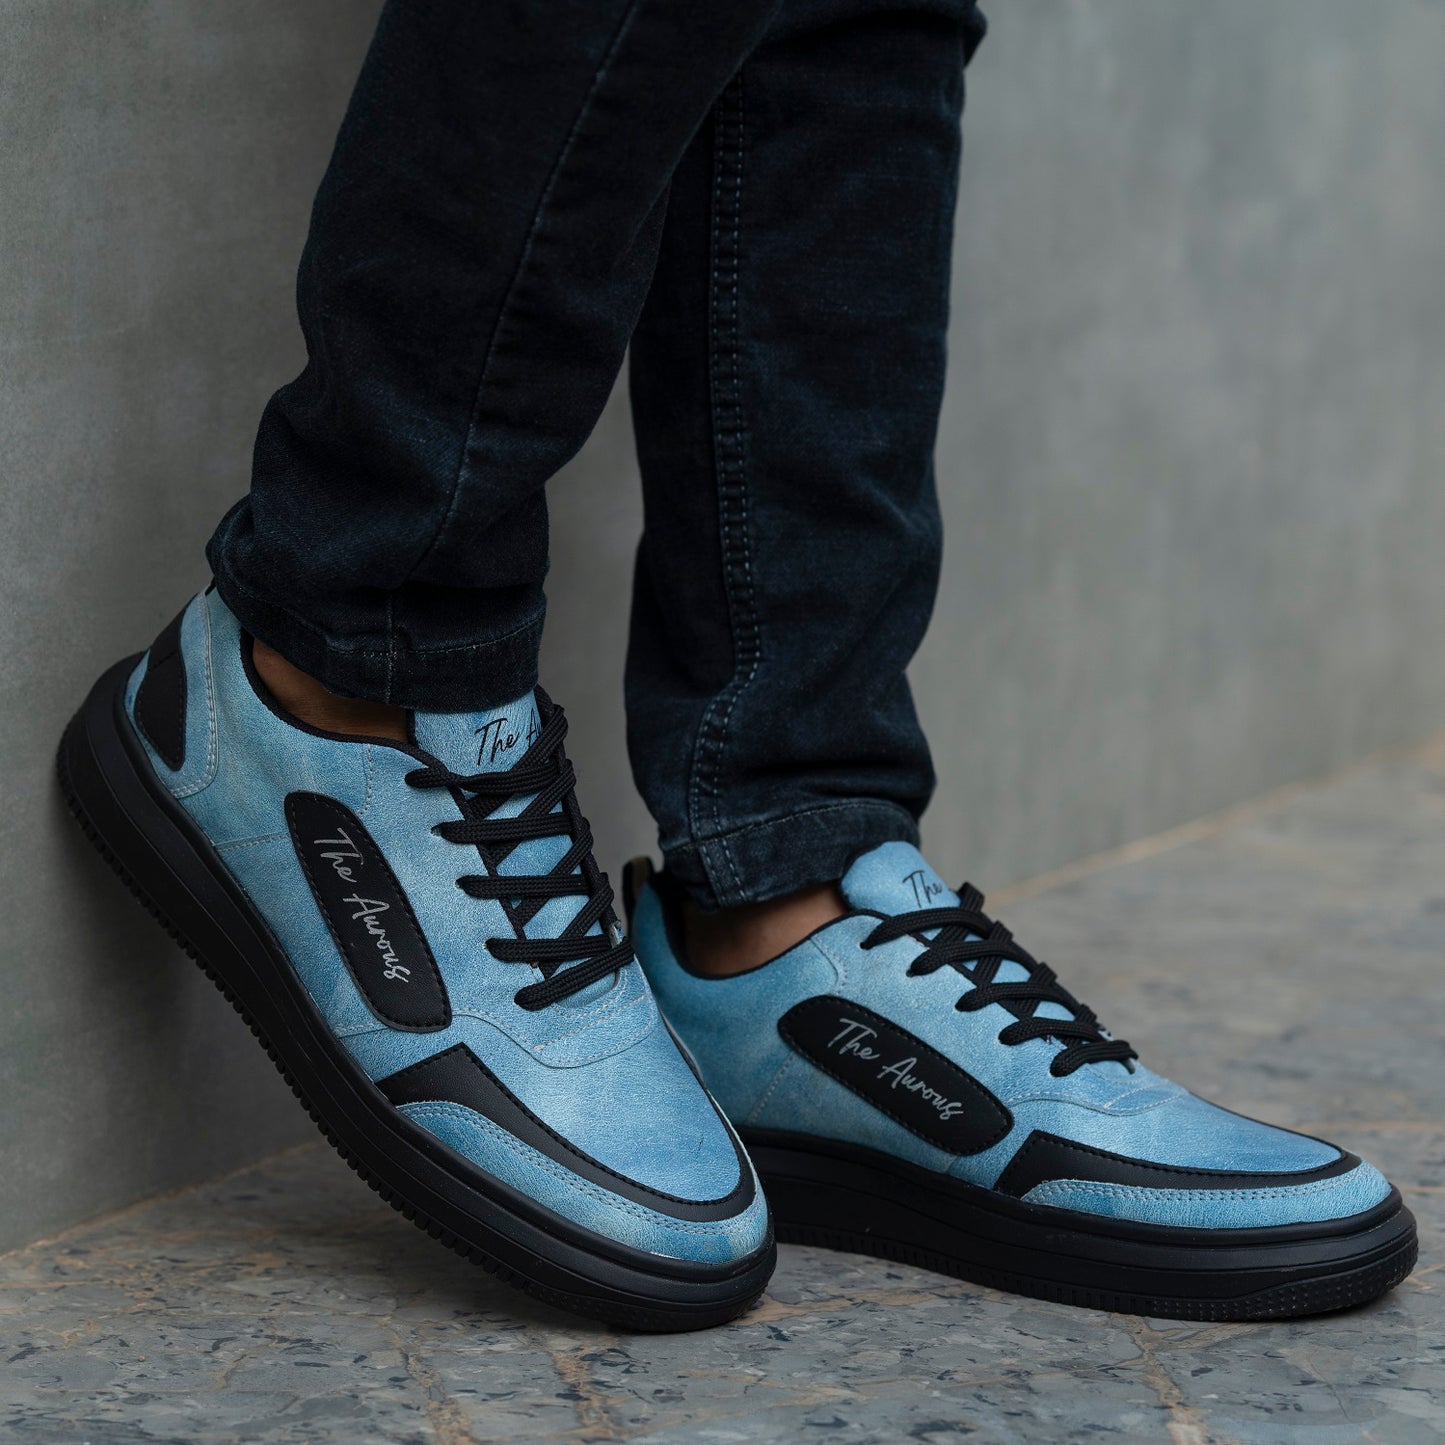 The Aurous Virtue Laceup Sneakers